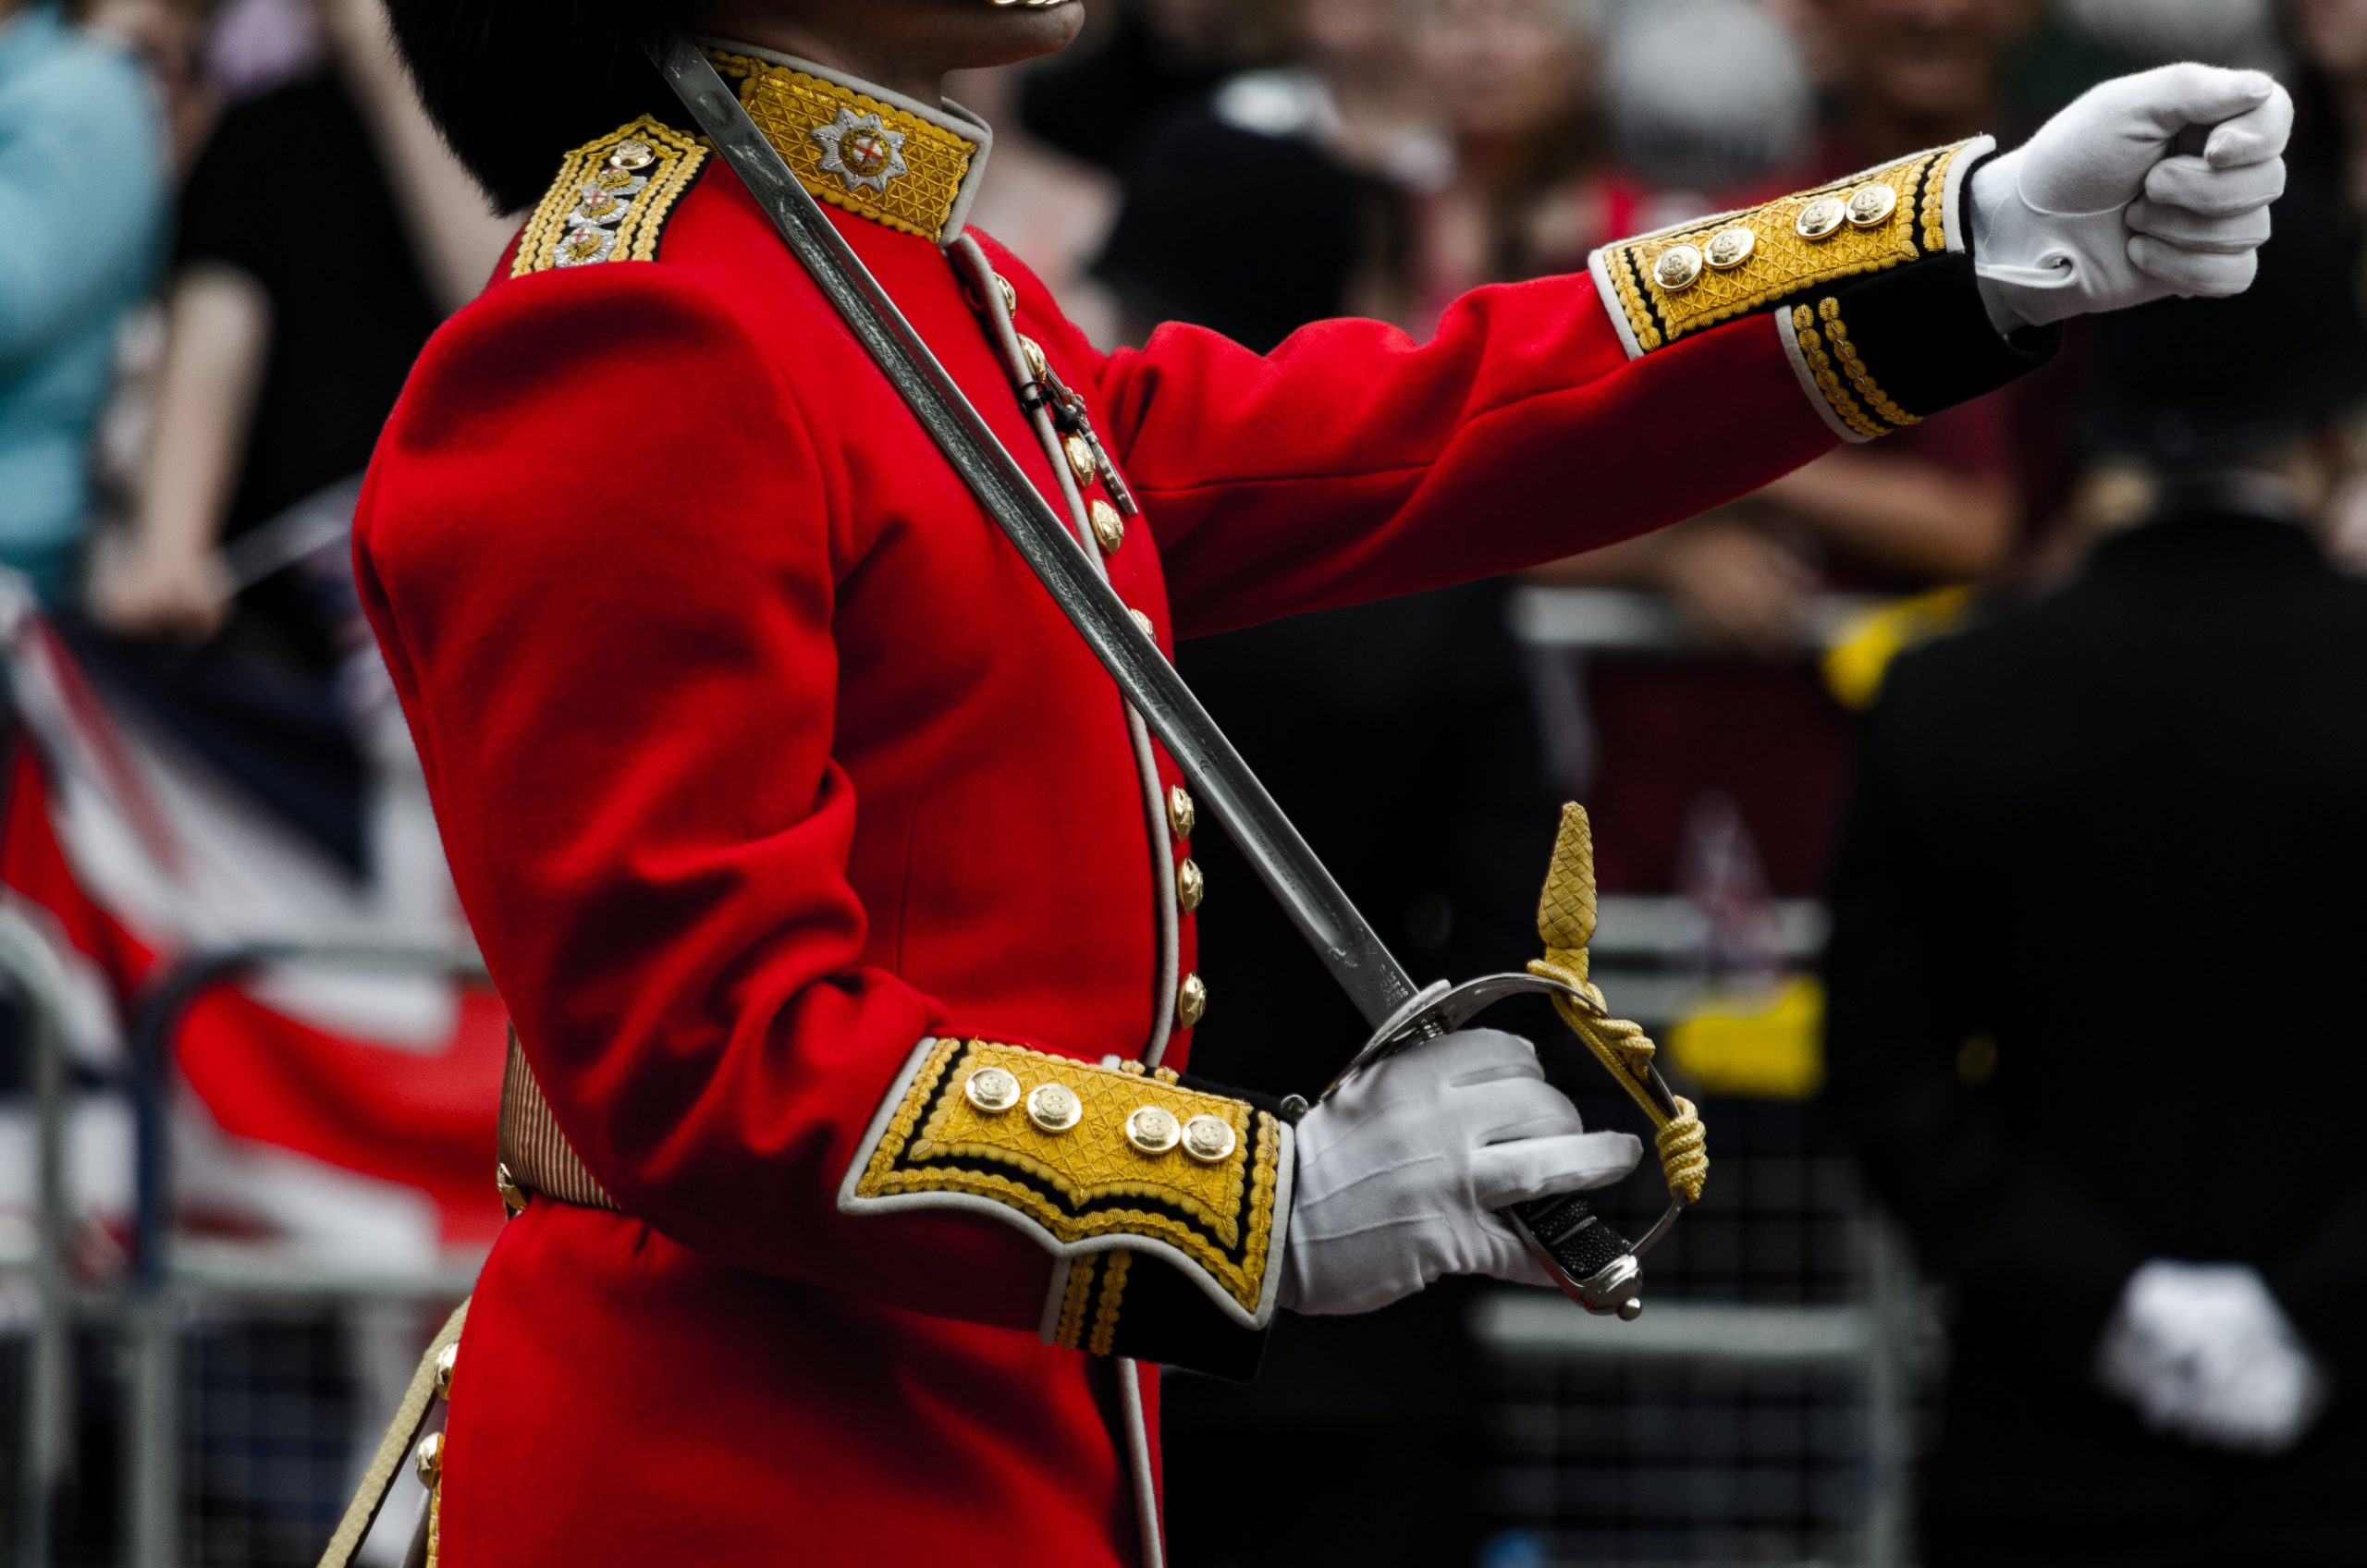 A soldier from The Queen's Guard marching in a parade.